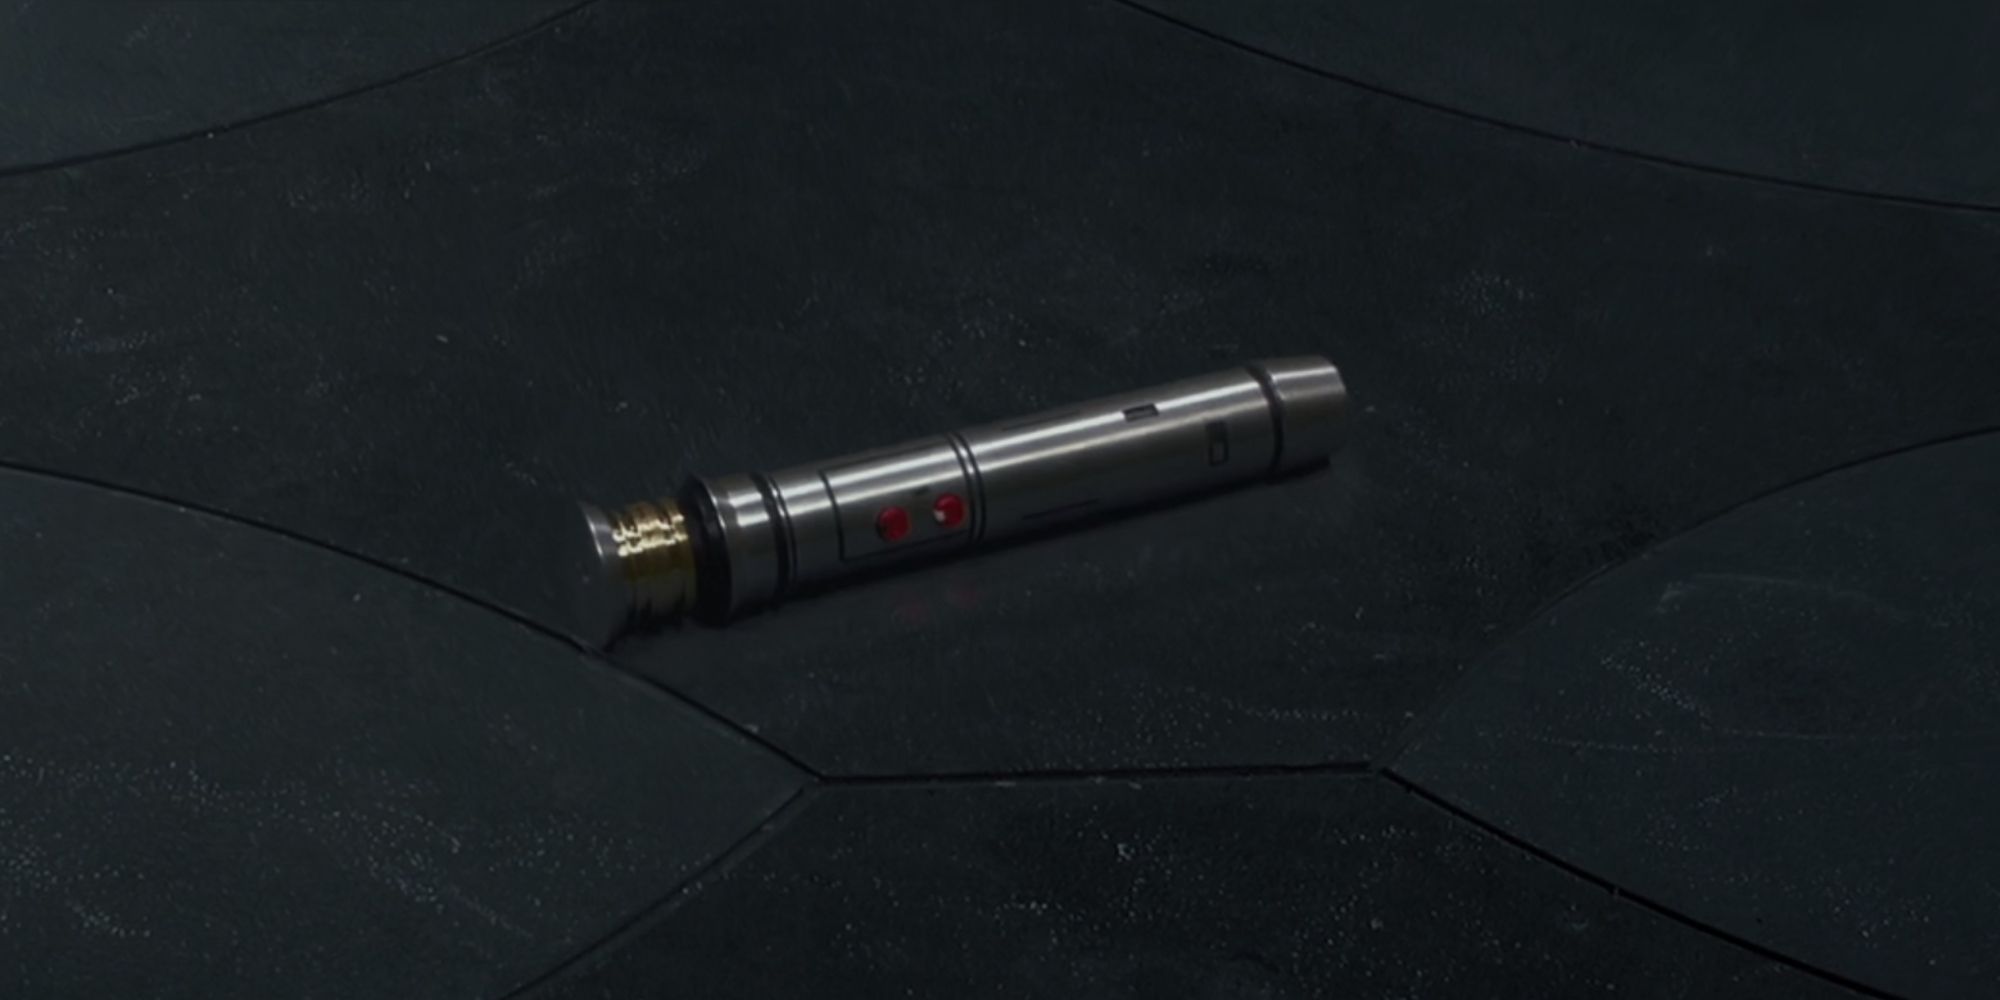 Obi-Wan's temporary lightsaber featured in Star Wars Attack Of The Clones